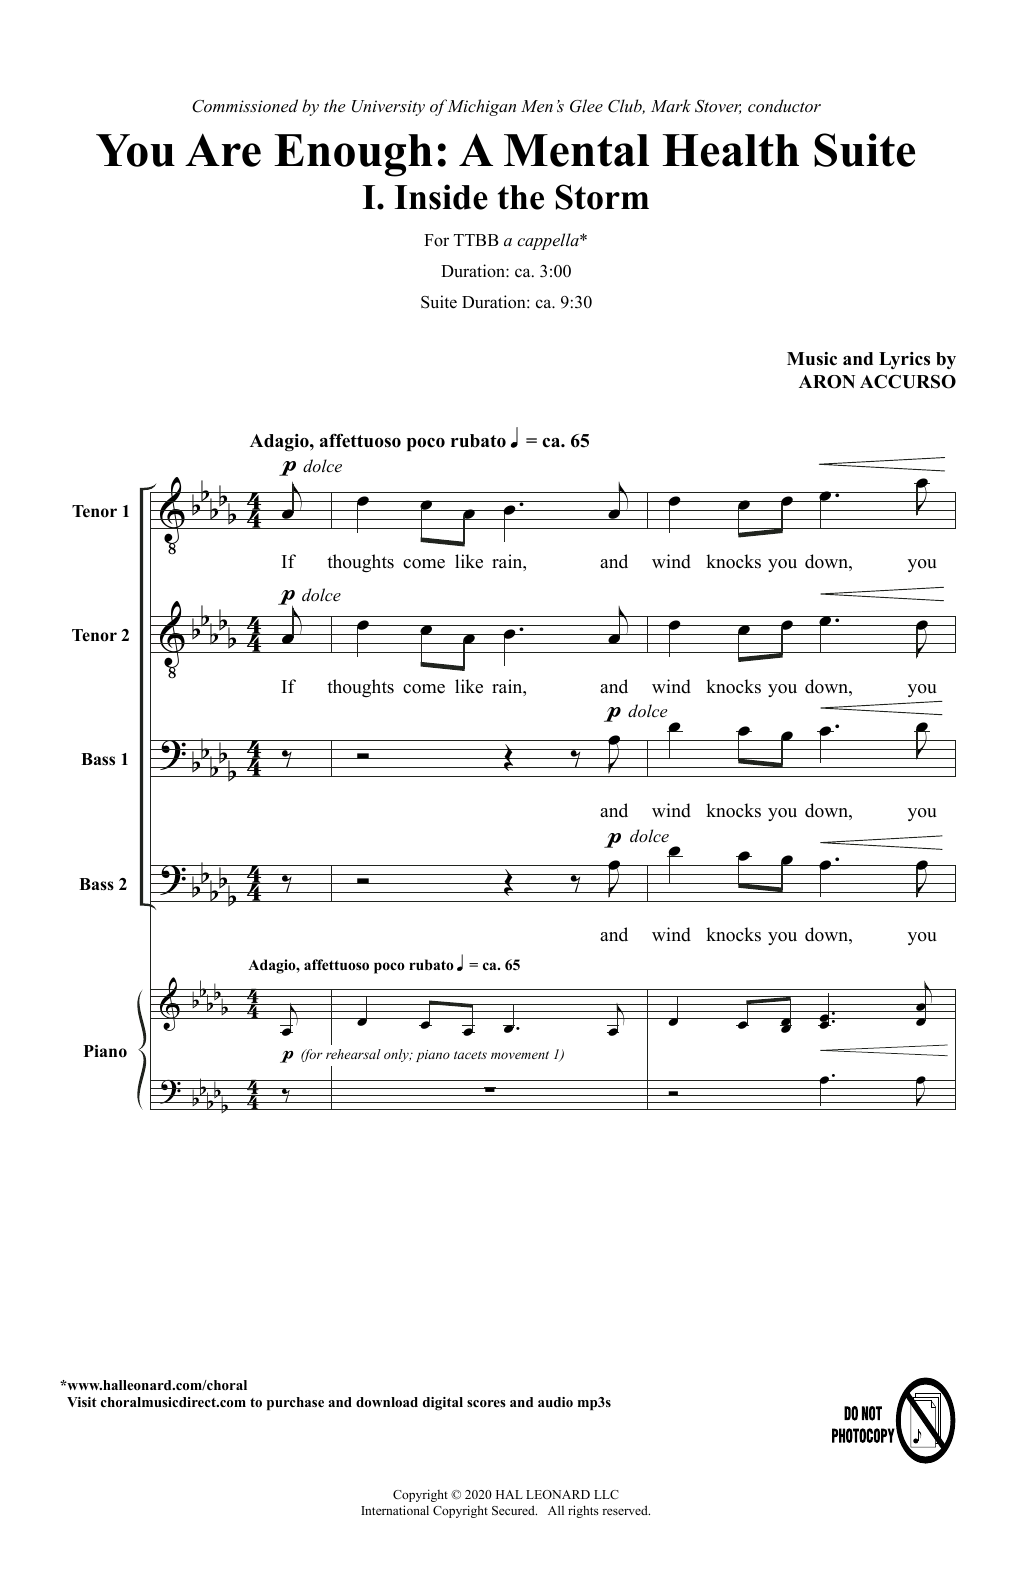 Download Aron Accurso You Are Enough: A Mental Health Suite Sheet Music